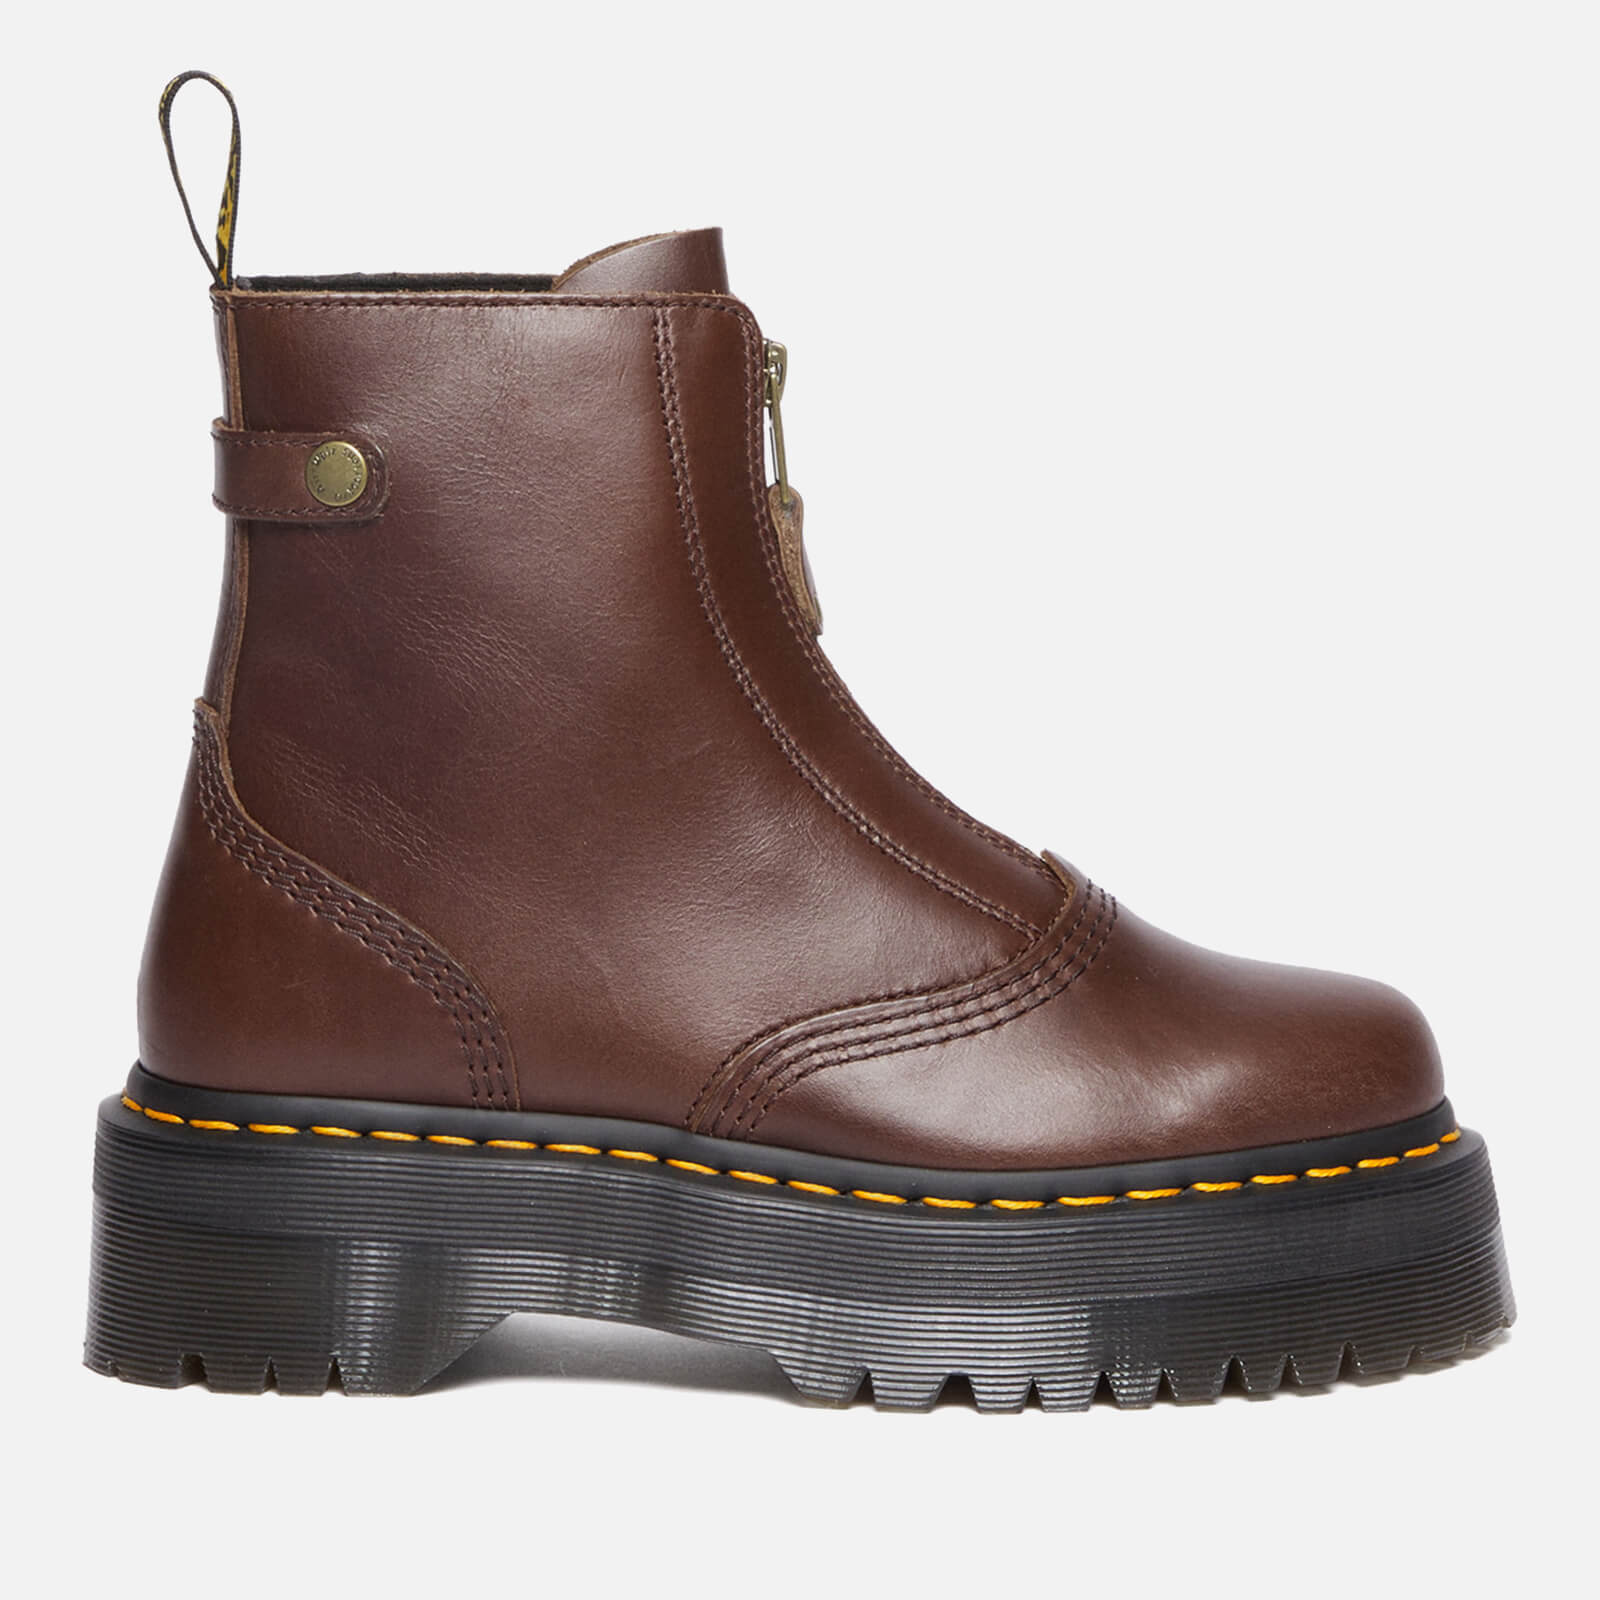 Dr. Martens Women’s Jetta Leather Boots